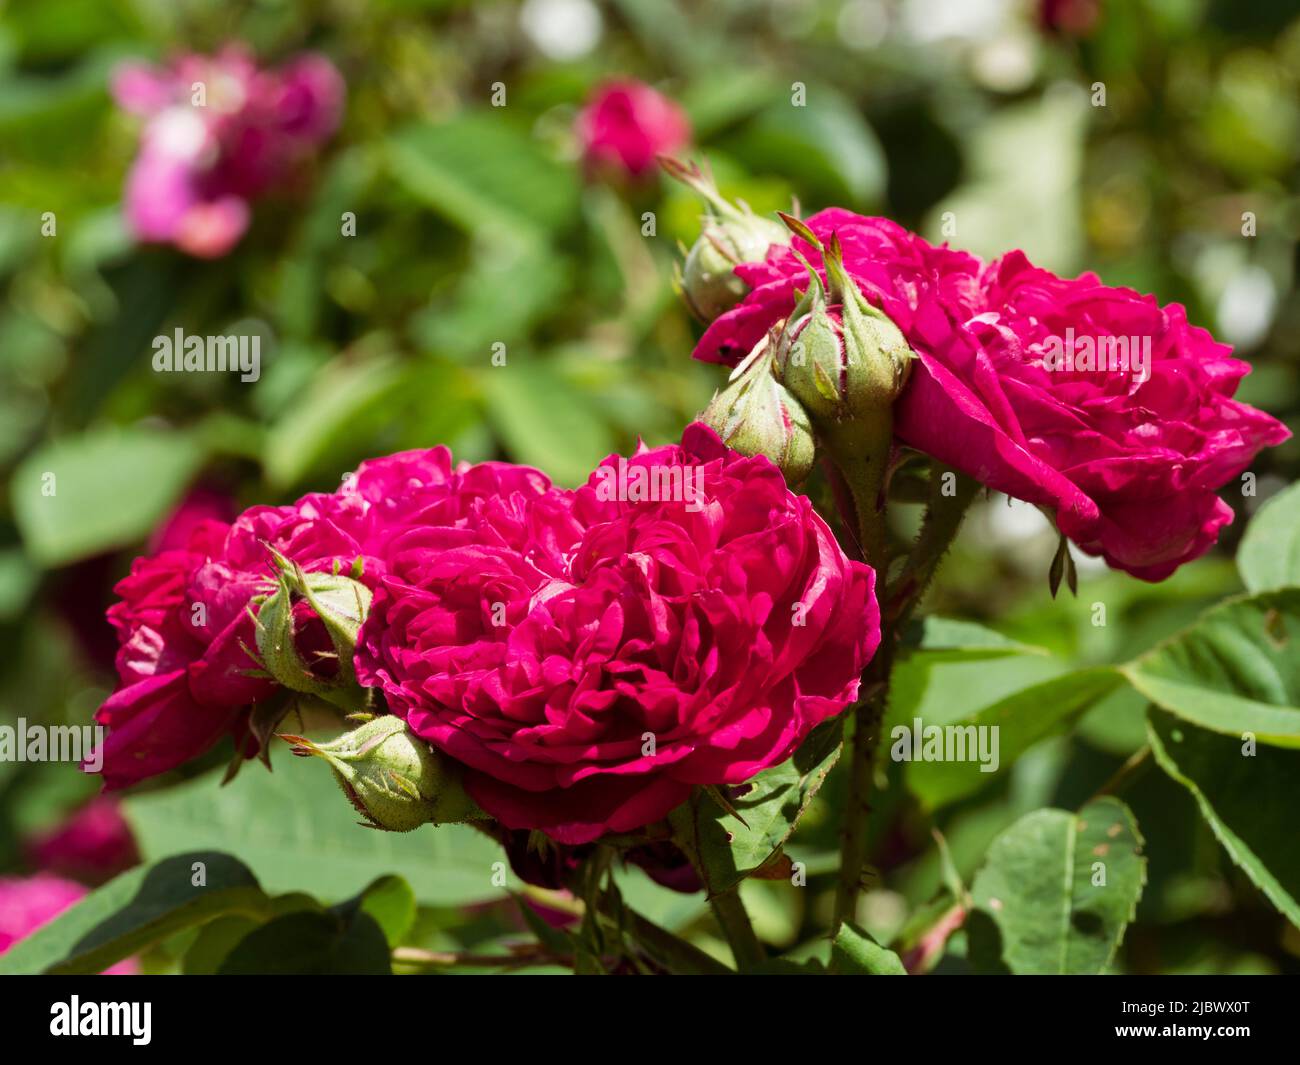 Scented red summer flowers of the hardy, repeat flowering Damask rose, Rosa 'De Resht' Stock Photo